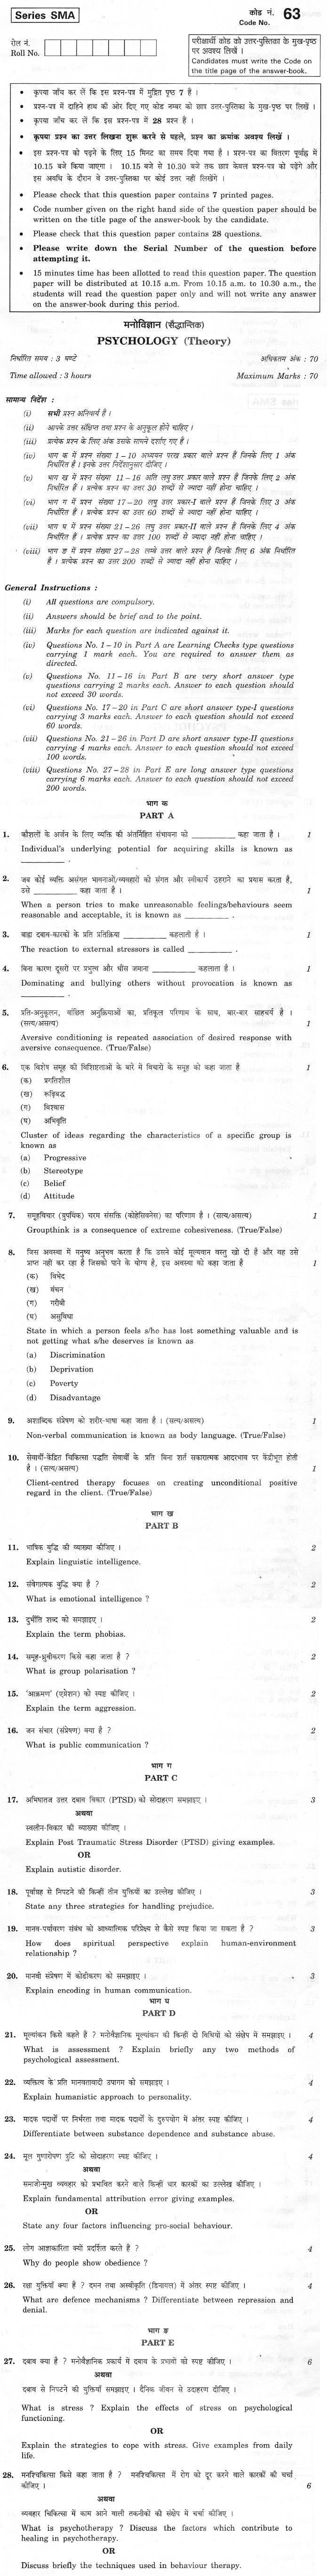 CBSE Class XII Previous Year Question Paper 2012 Psychology